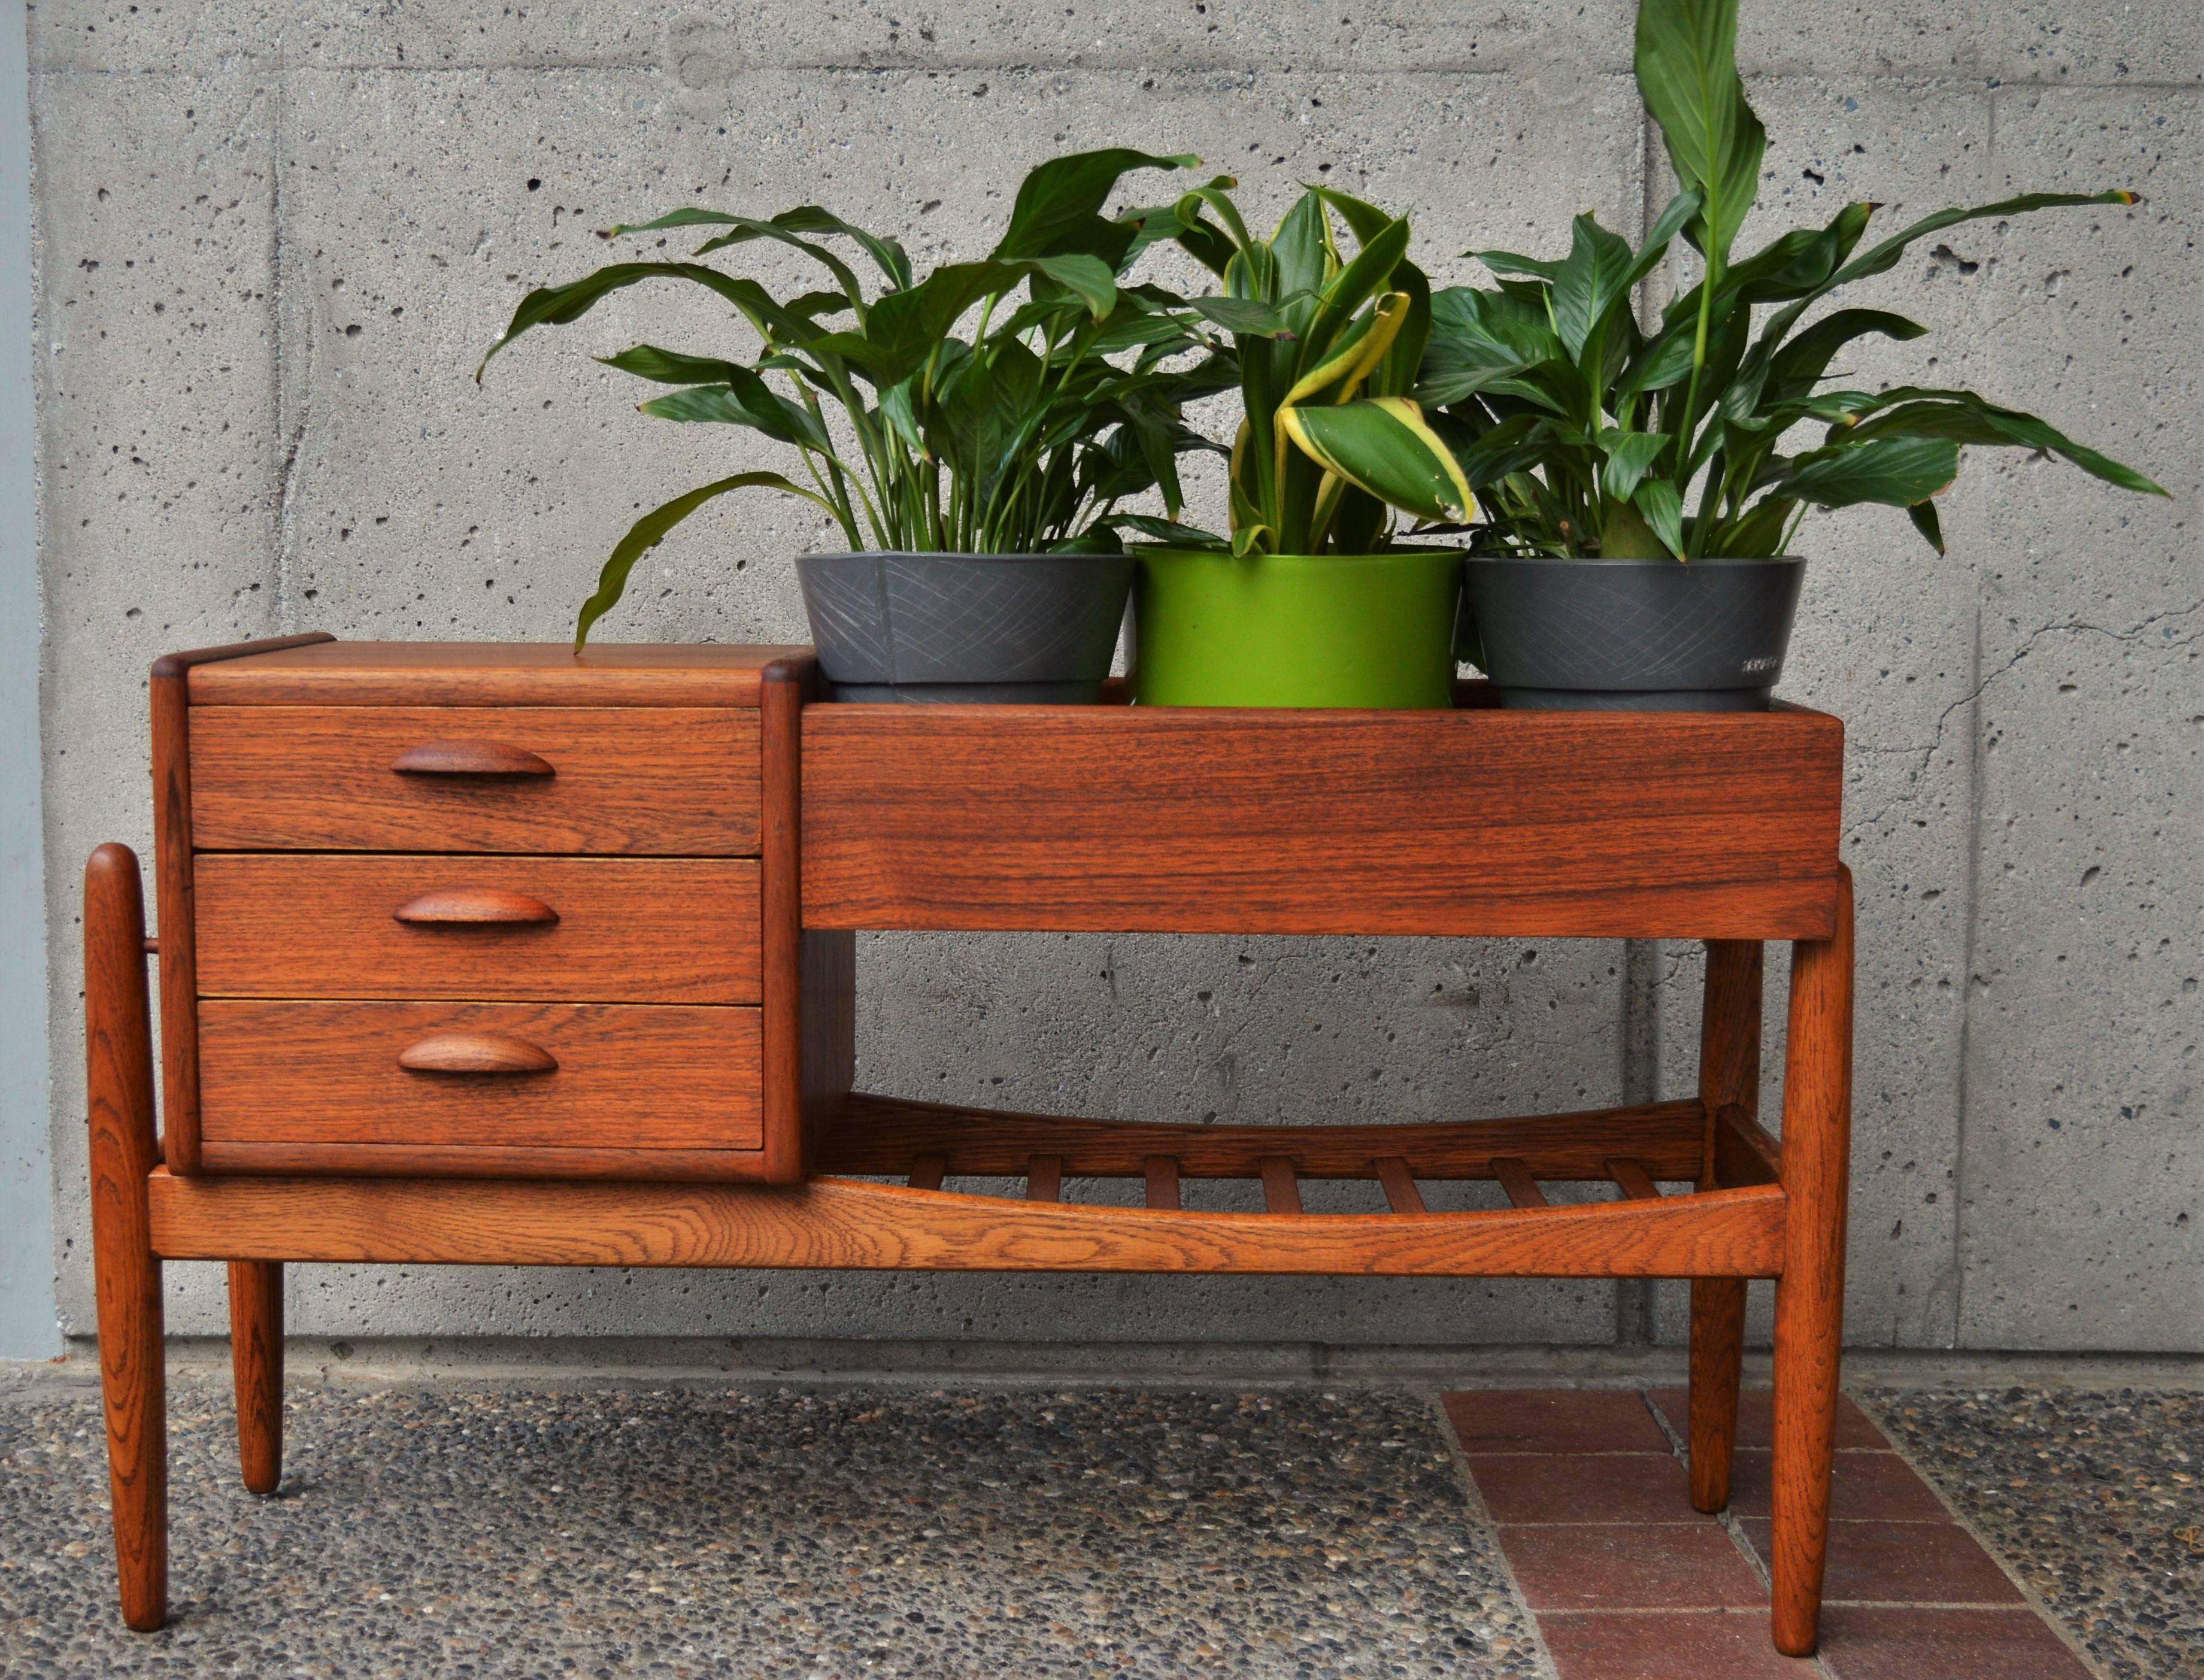 This is an awesome Danish Modern teak planter or room divider combo with a lower slat shelf attributed to Arne Wahl Iversen. This piece is the ideal unit to create your entry way/vestibule, as it is beautifully finished on all sides. Simply put this